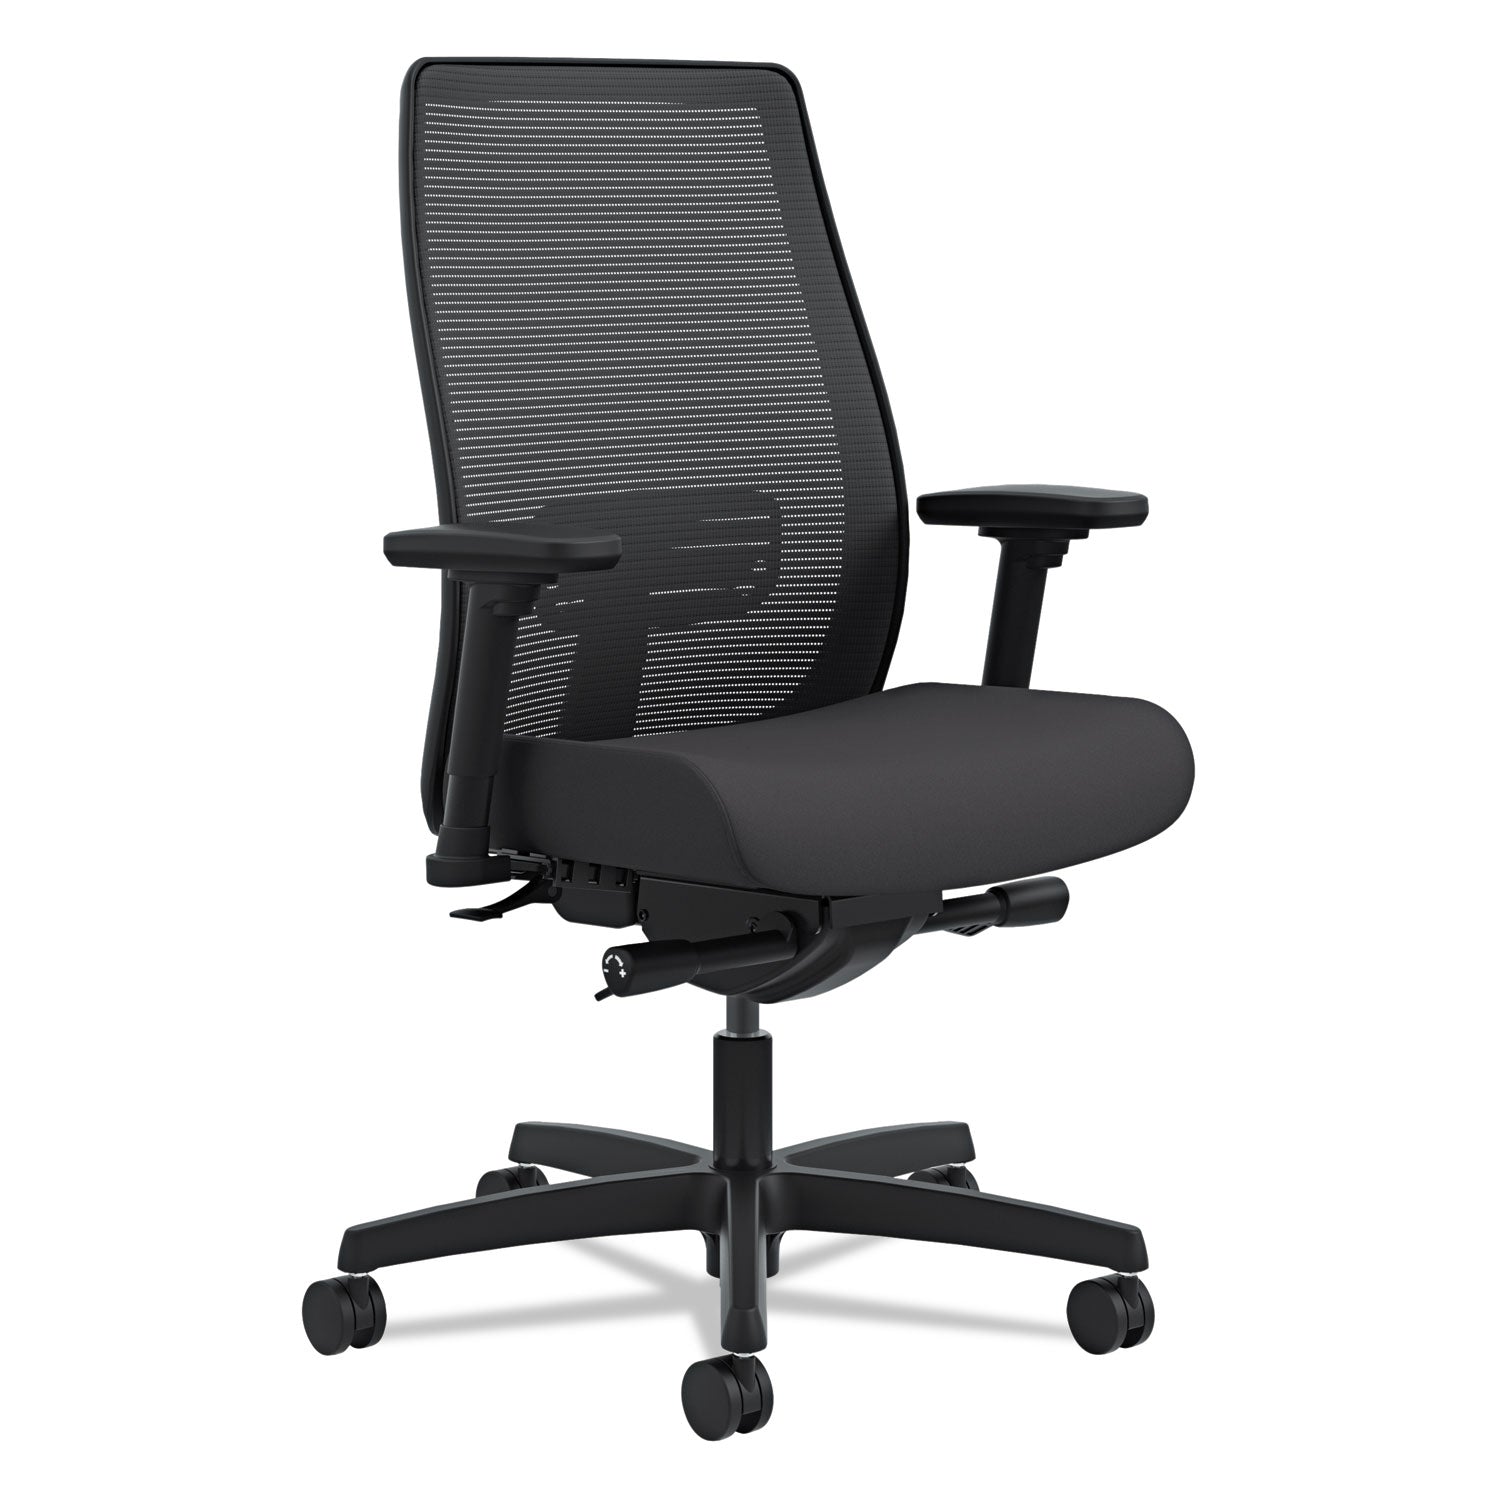 Endorse Mesh Mid-Back Work Chair, Supports Up to 300 lb, 17.5" to 21.75" Seat Height, Black - 